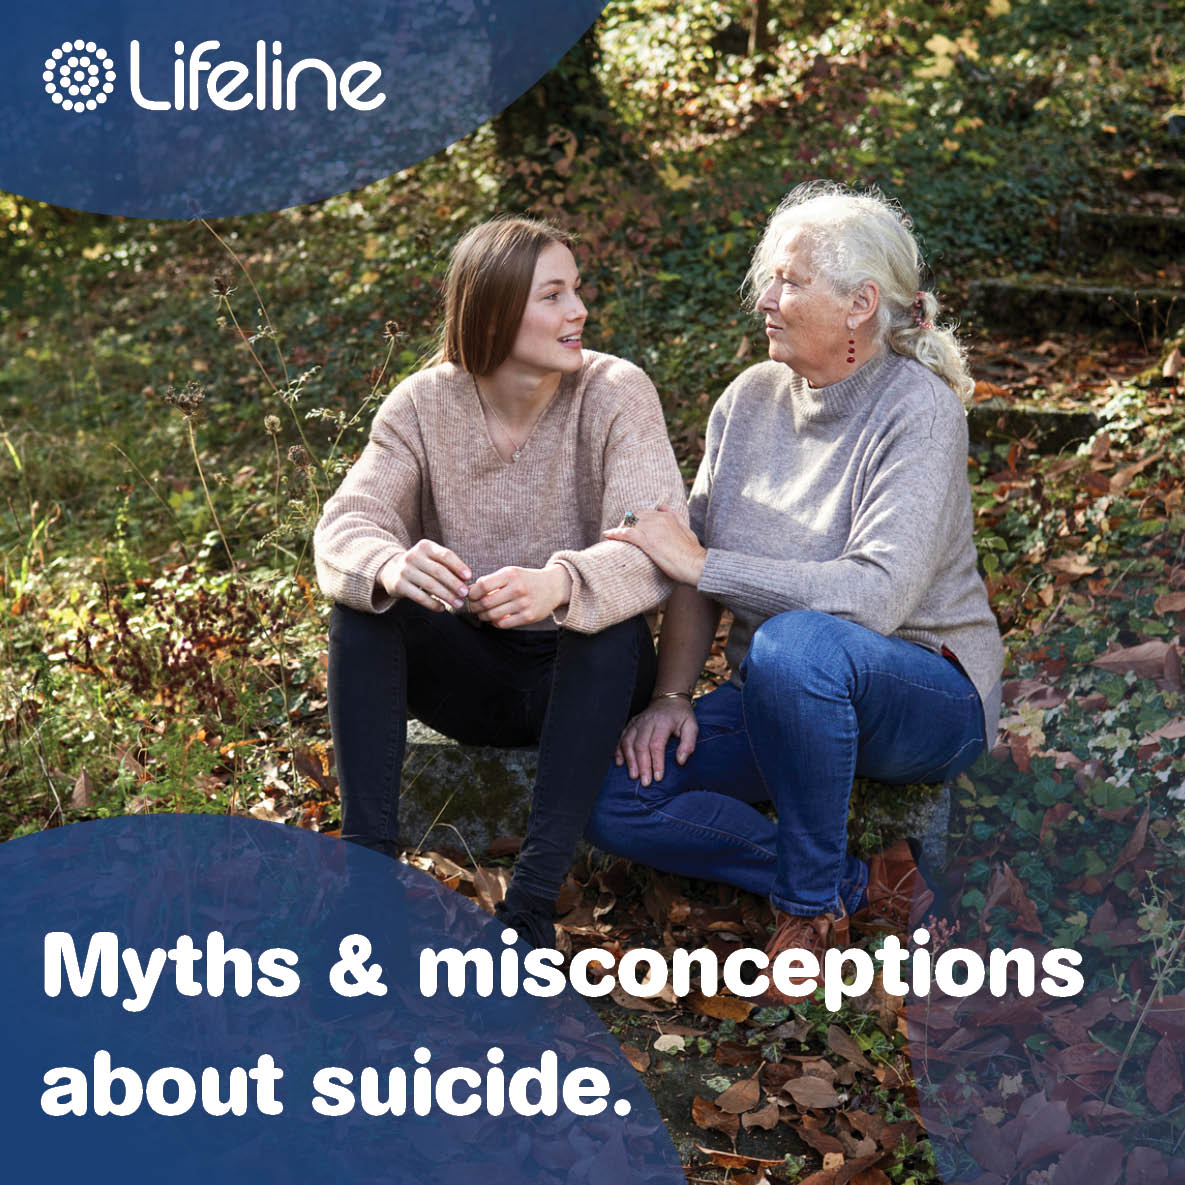 Myth: 'Asking someone if they are suicidal will make them more likely to attempt suicide.' Asking someone if they are suicidal, in a compassionate and non-judgemental way, can actually help them to feel heard and supported toolkit.lifeline.org.au/topics/suicide…